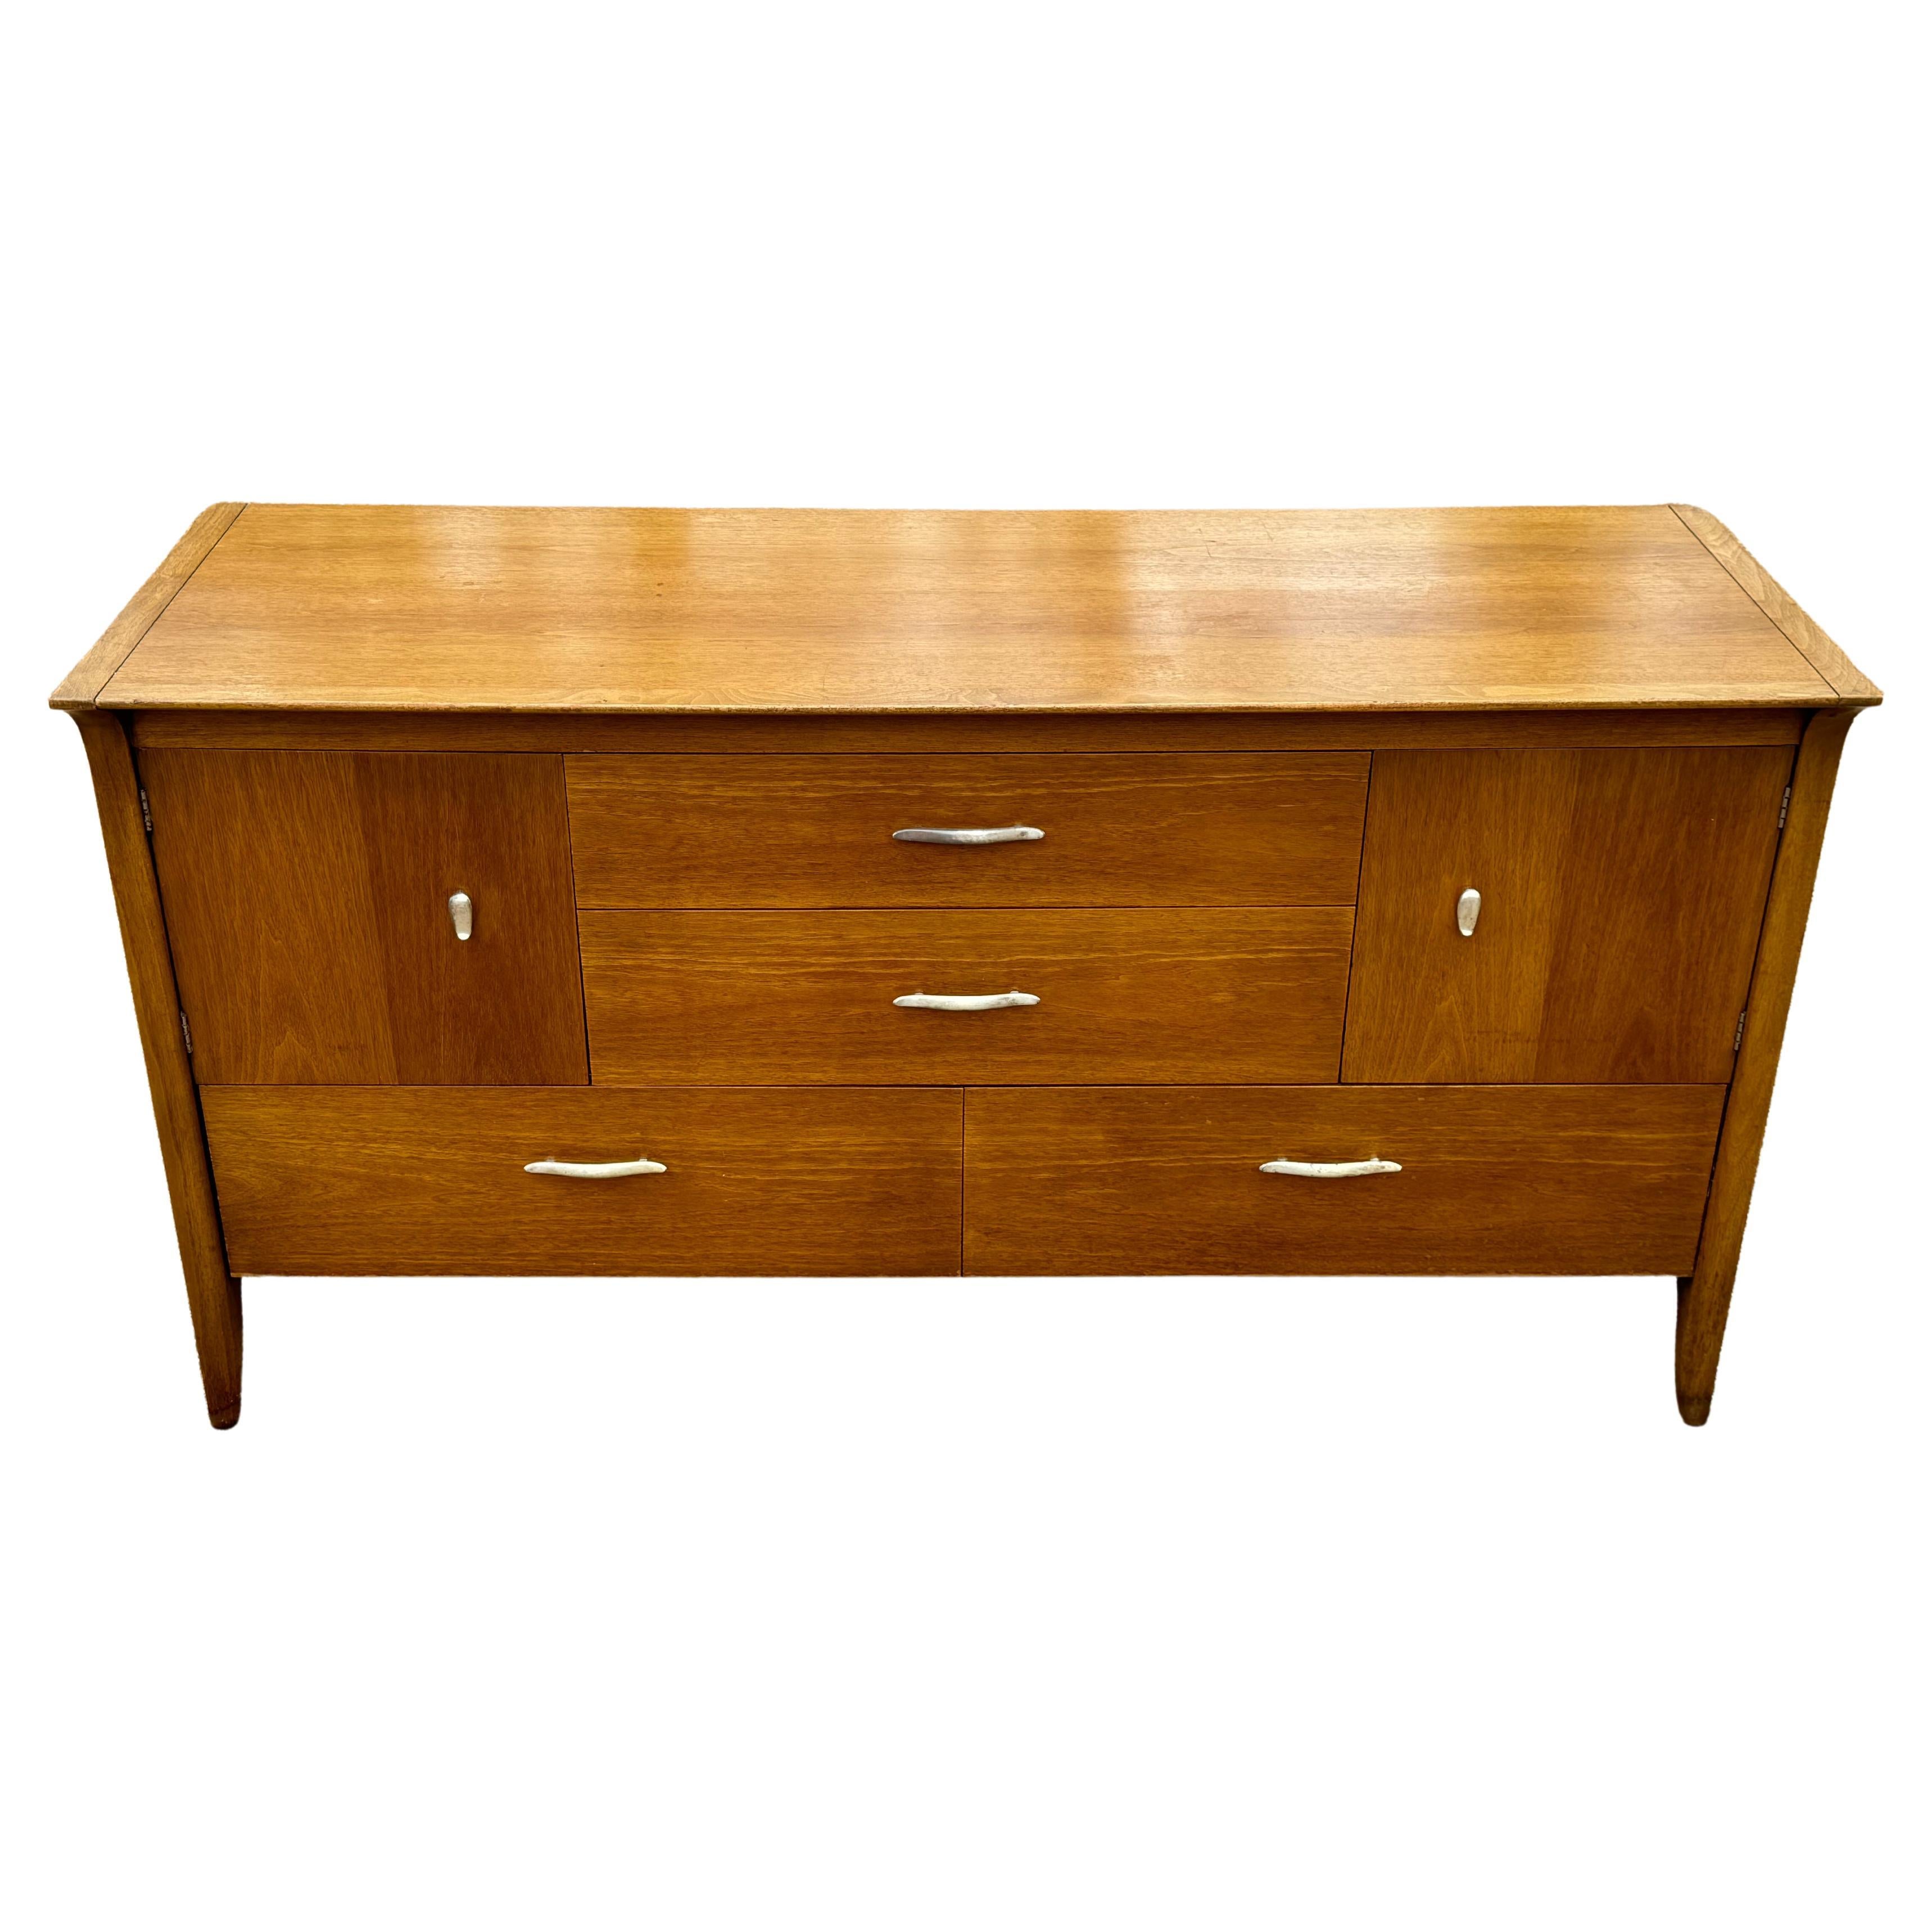 John Van Koert for Drexel designed sculptural Sideboard, buffet or Credenza designed as part of the classic Profile series. This walnut veneered sideboard has same sleek lines as the dining table, having unique silver plated hardware, two center